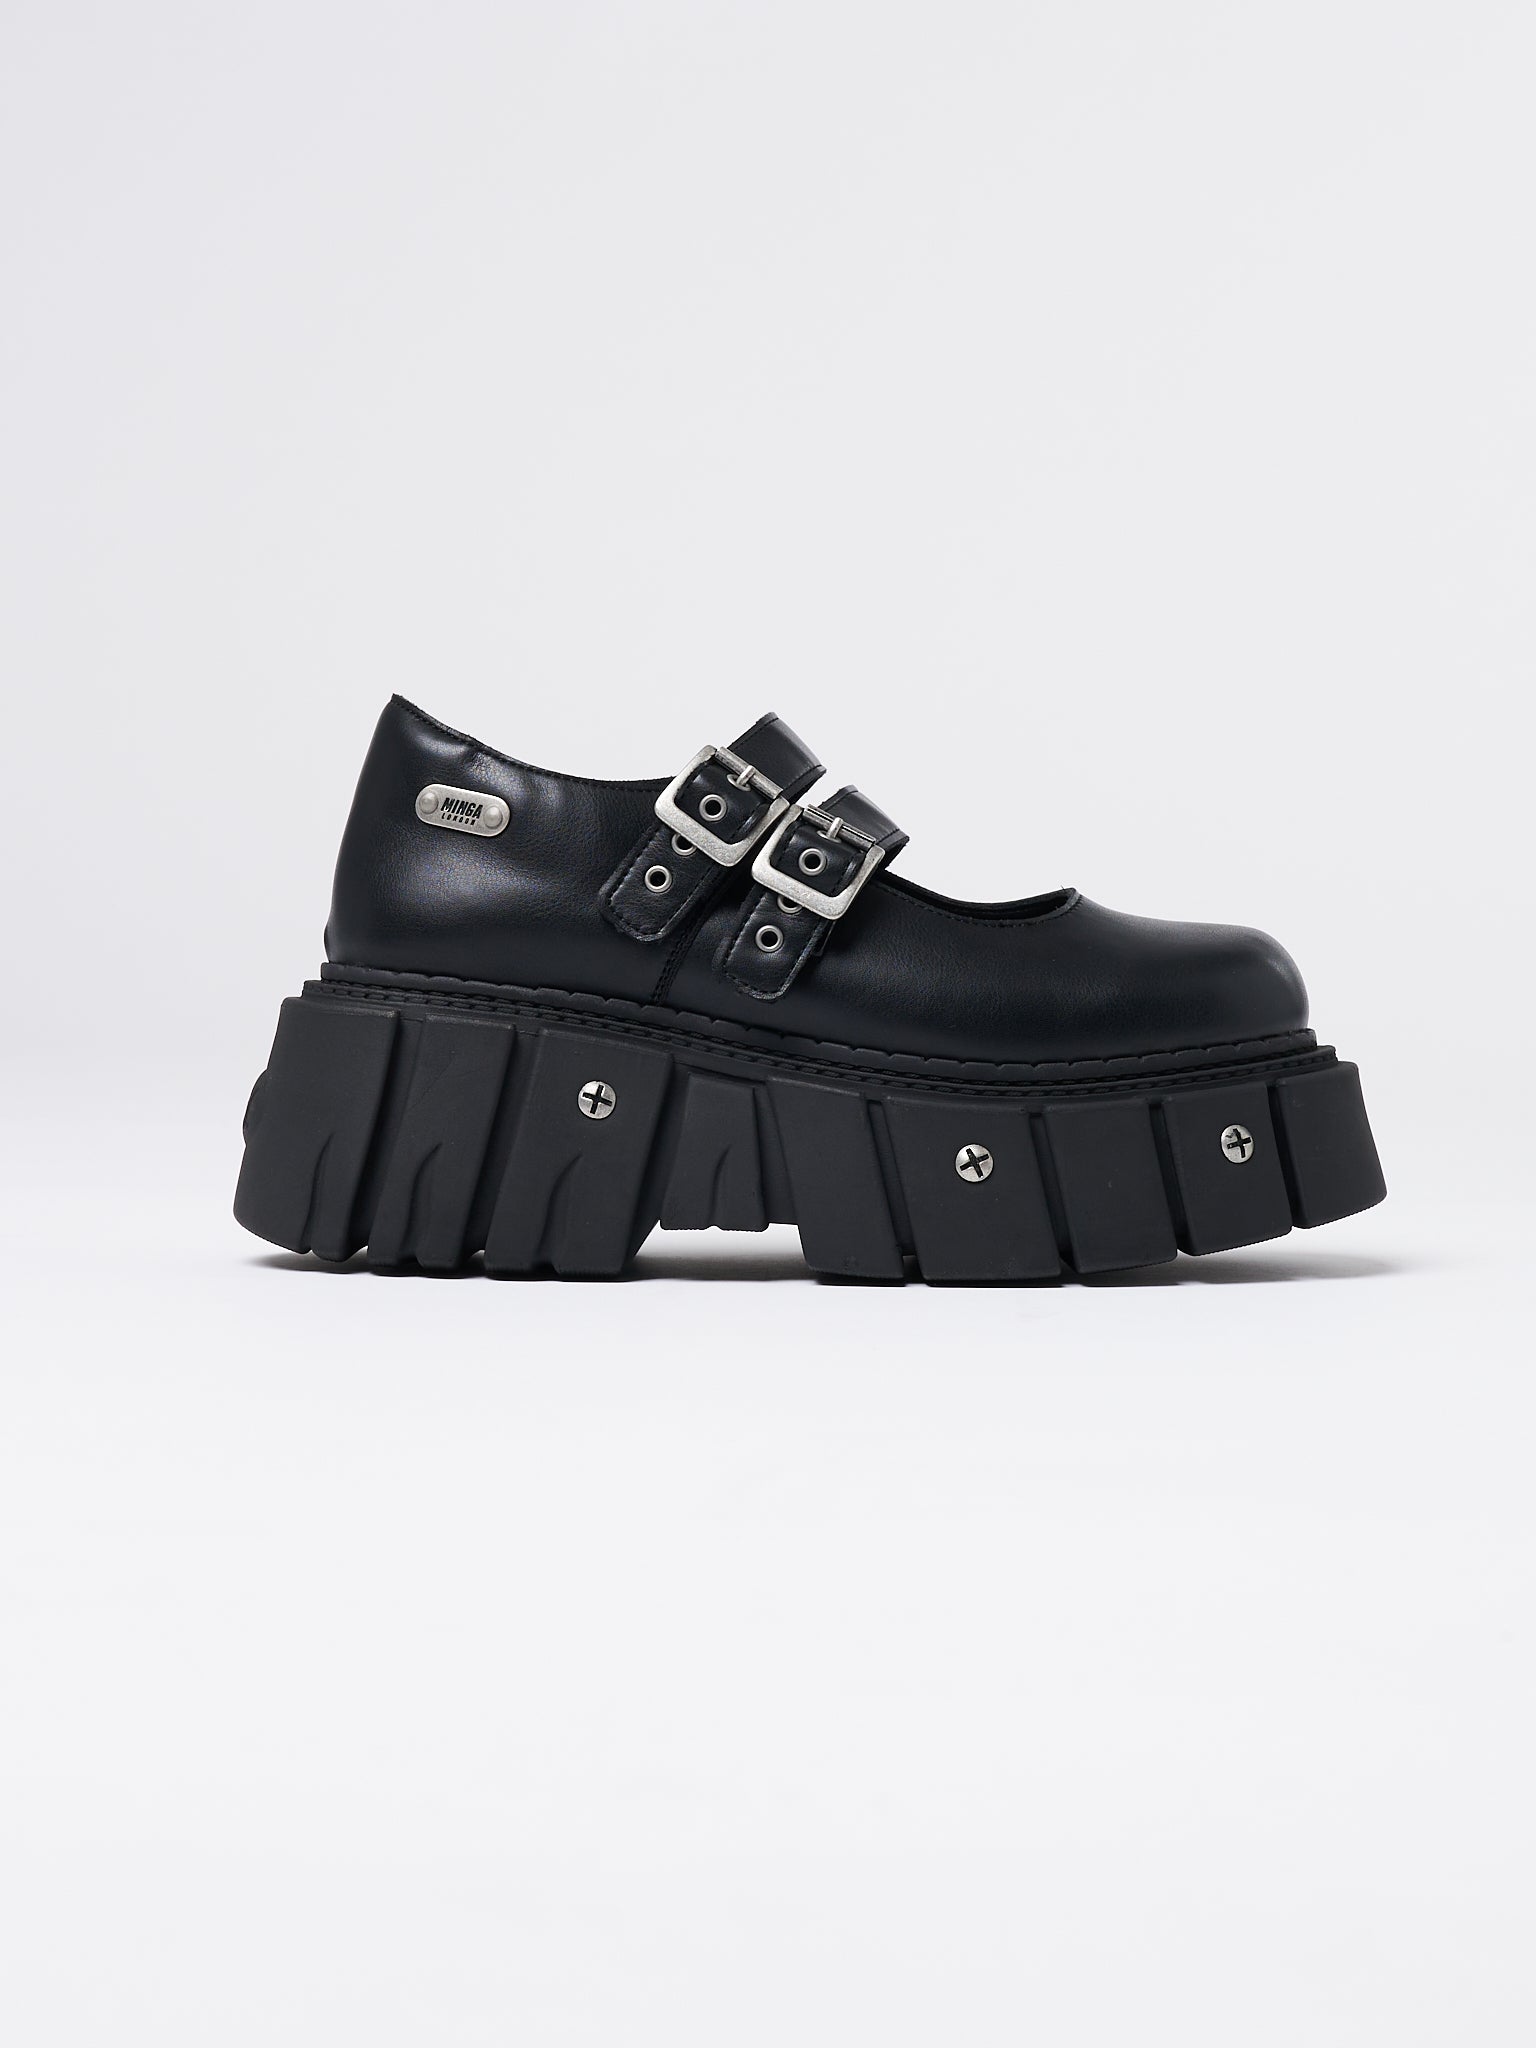 Black chunky platform Mary-Janes by Minga London. Edgy and stylish footwear with a comfortable fit. Perfect for adding a bold touch to any outfit.